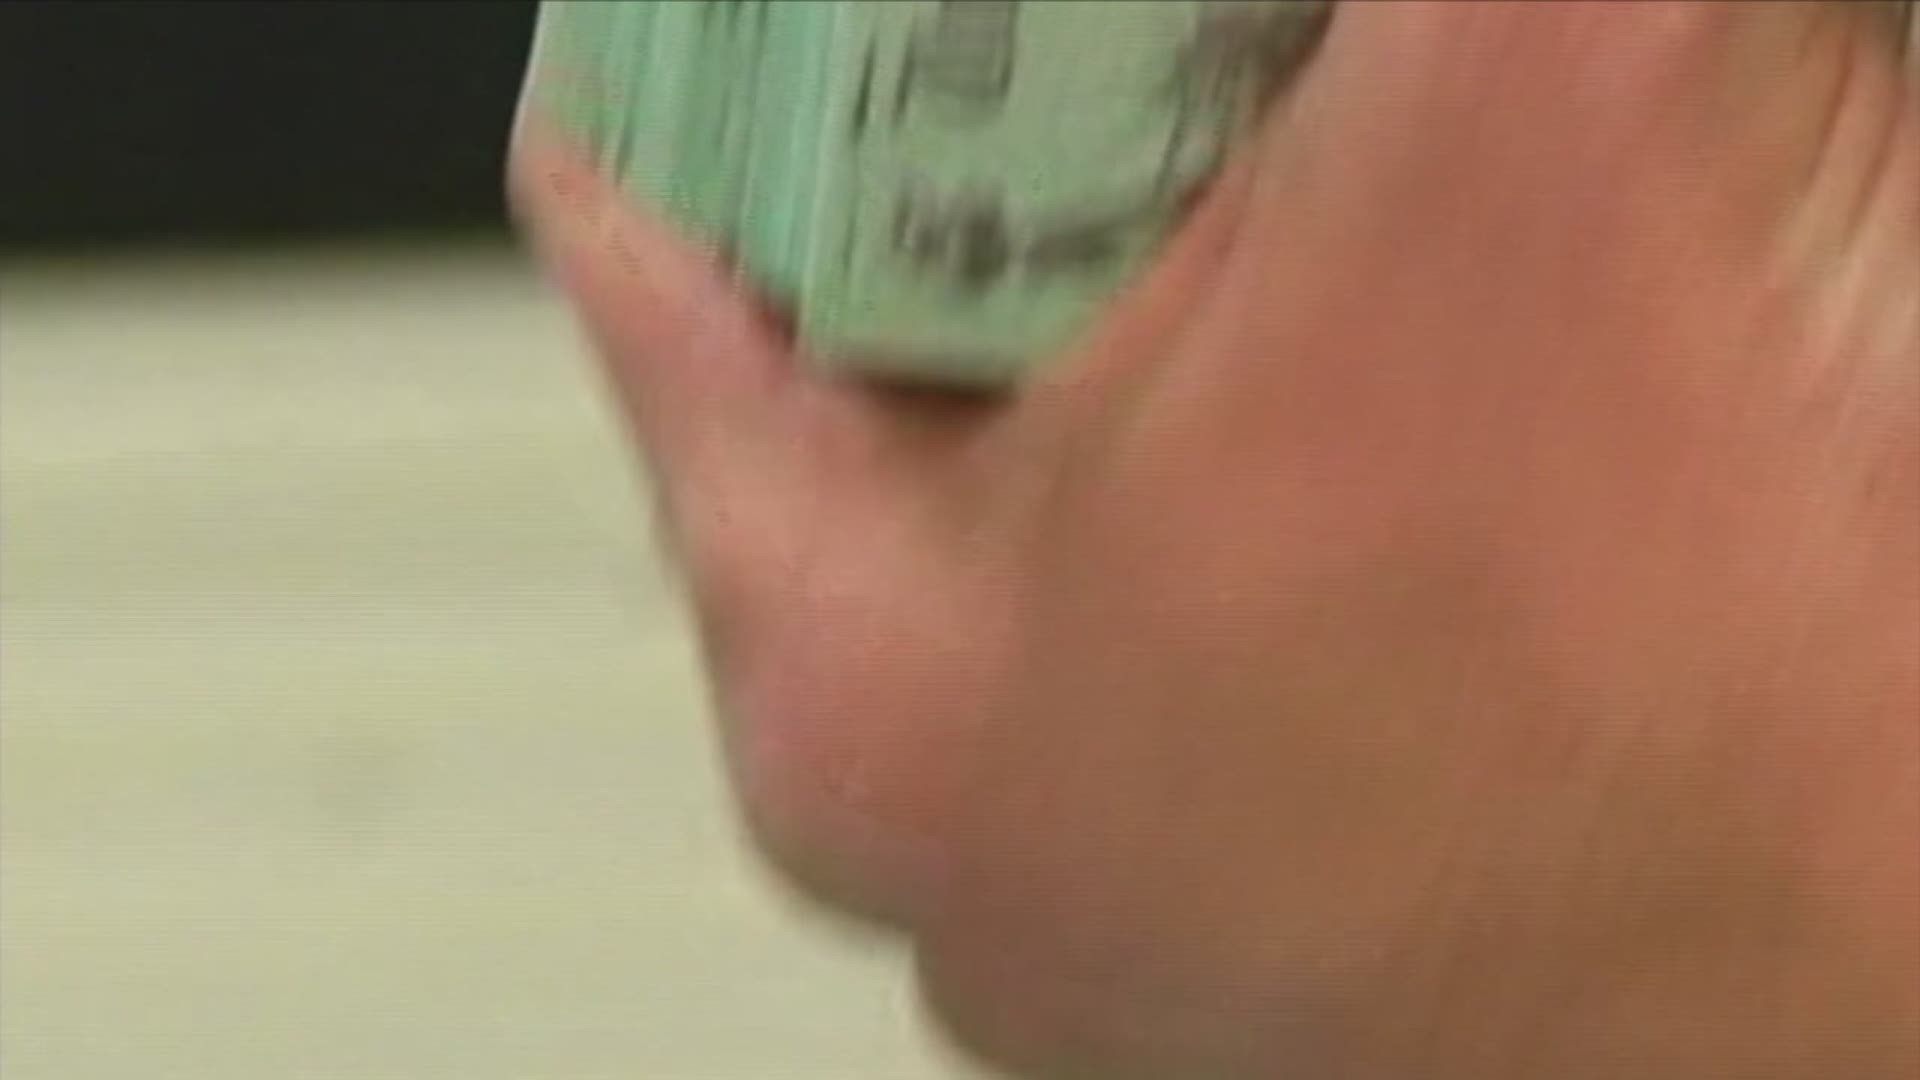 Local law enforcement warns that scammers are trying to take advantage of the confusion around stimulus checks